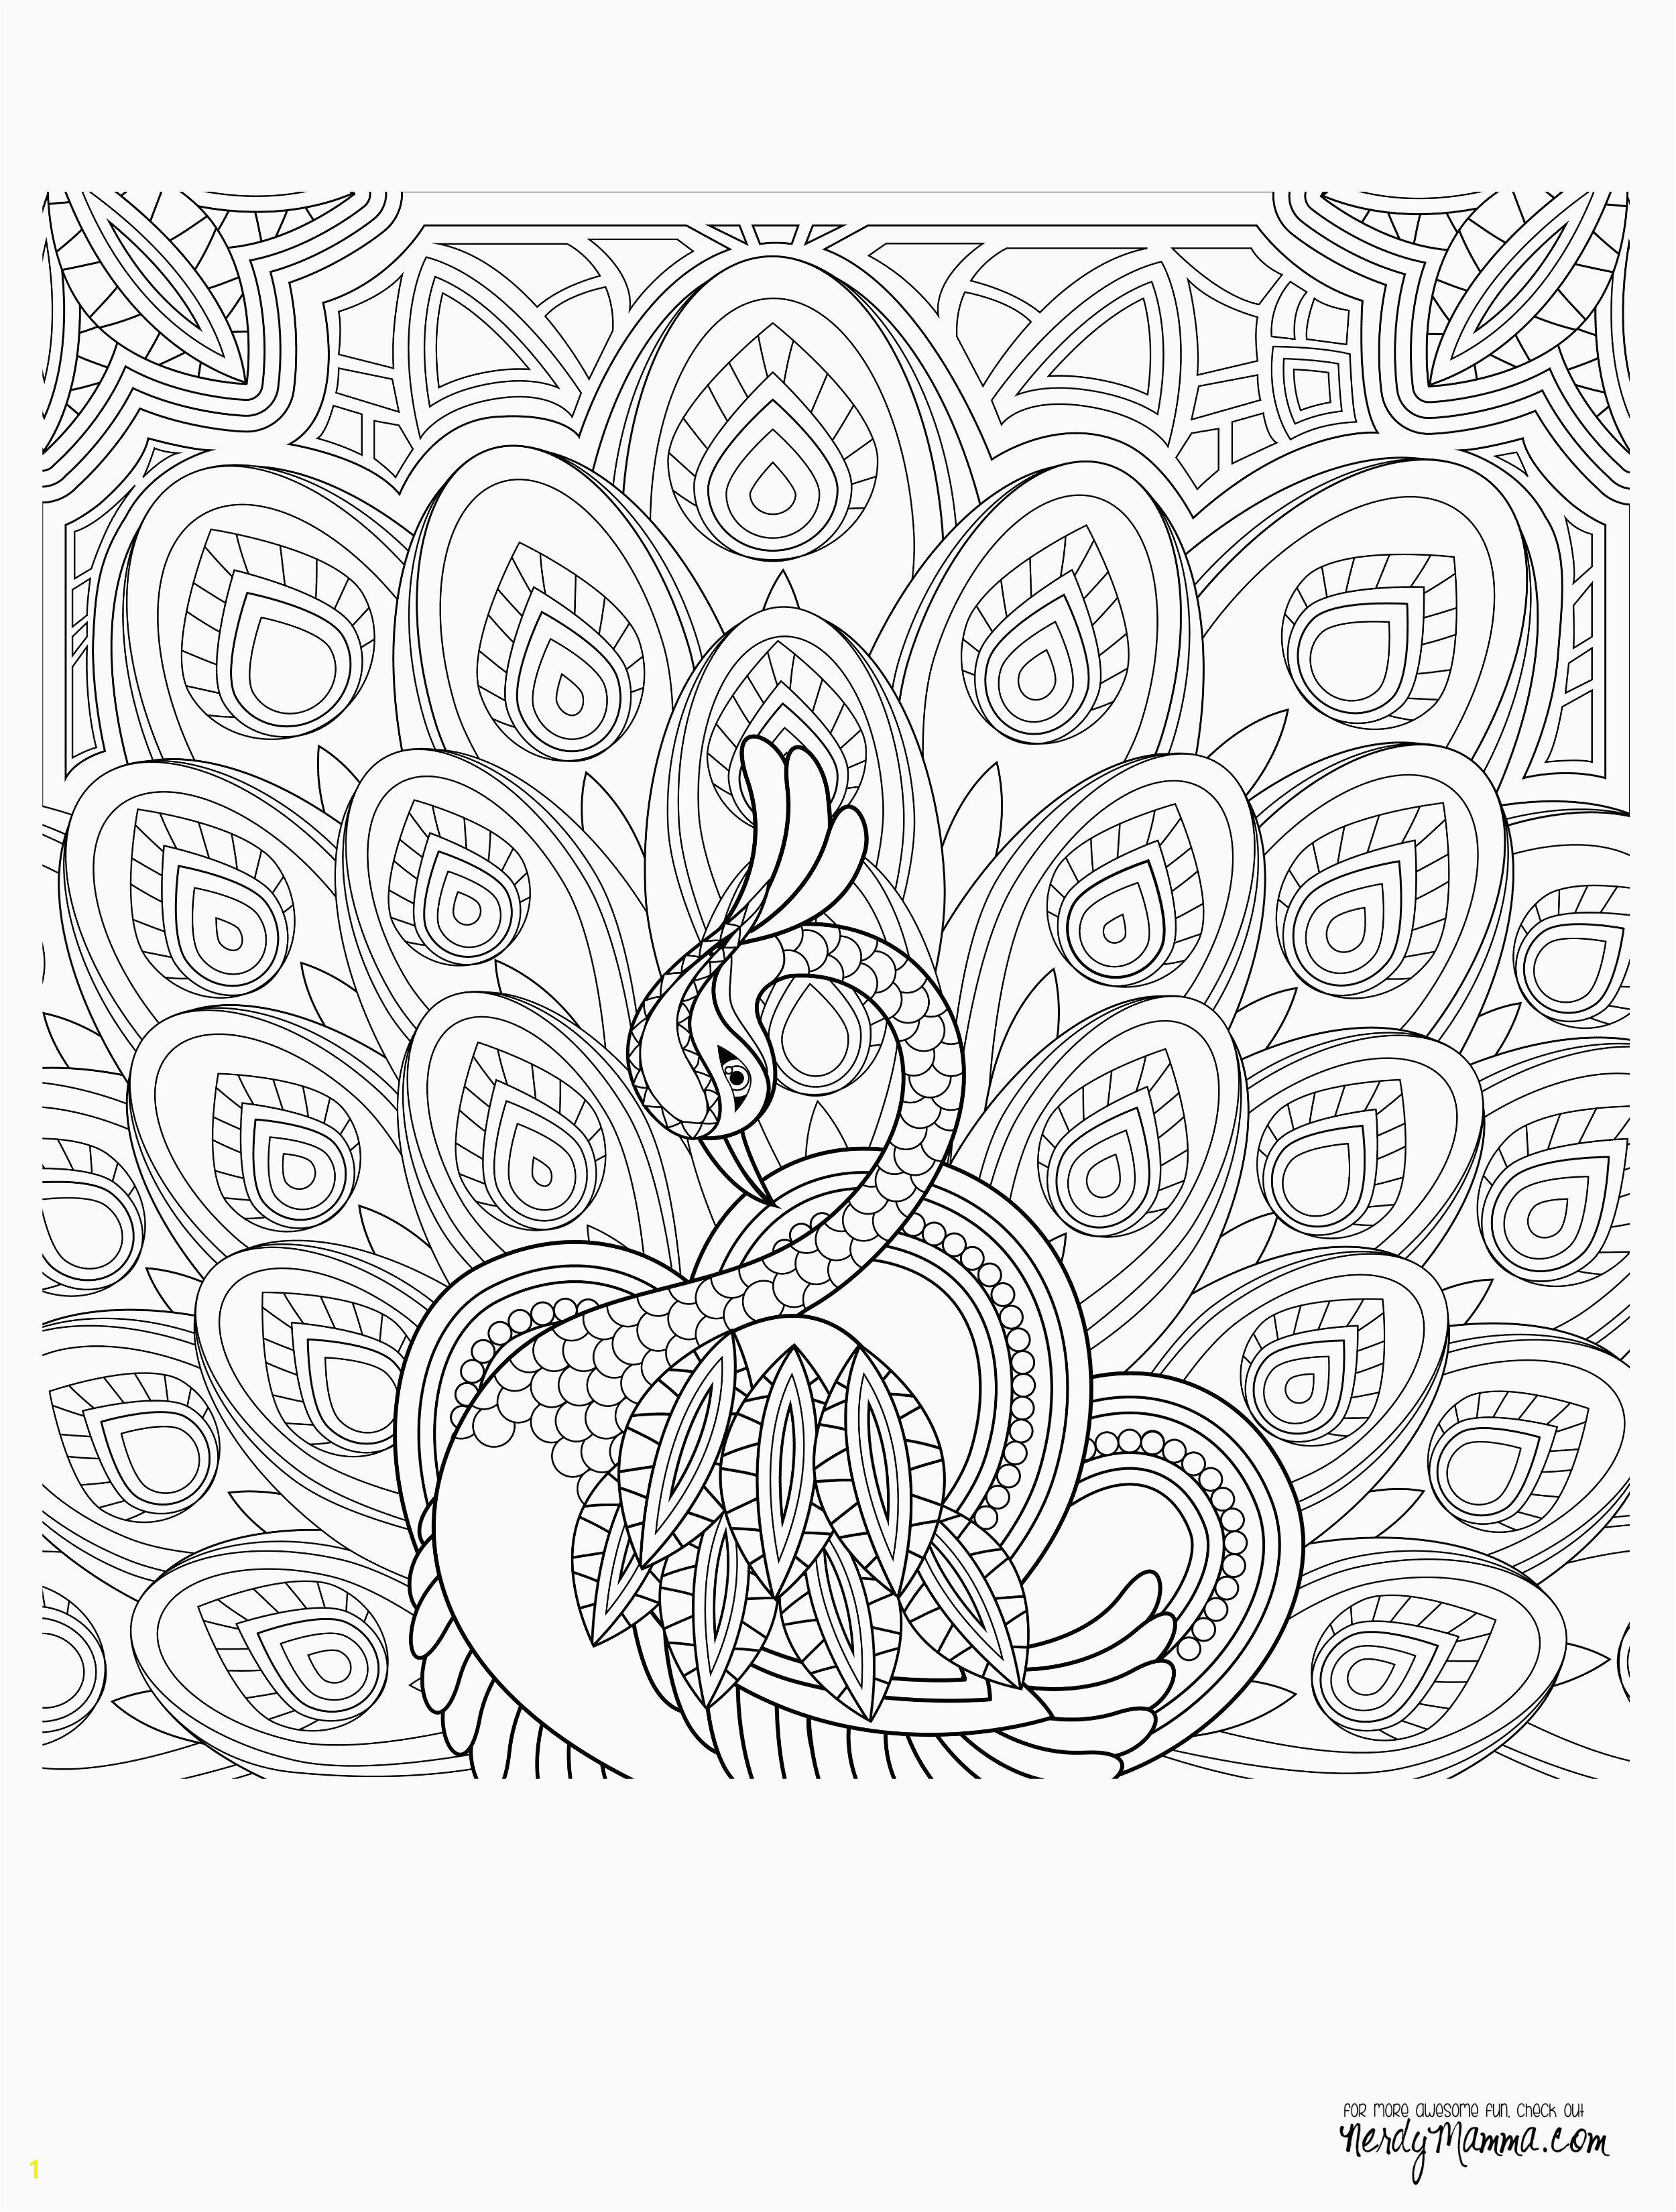 Free Printable Nature Coloring Pages Beautiful Awesome Coloring Page for Adult Od Kids Simple Floral Heart